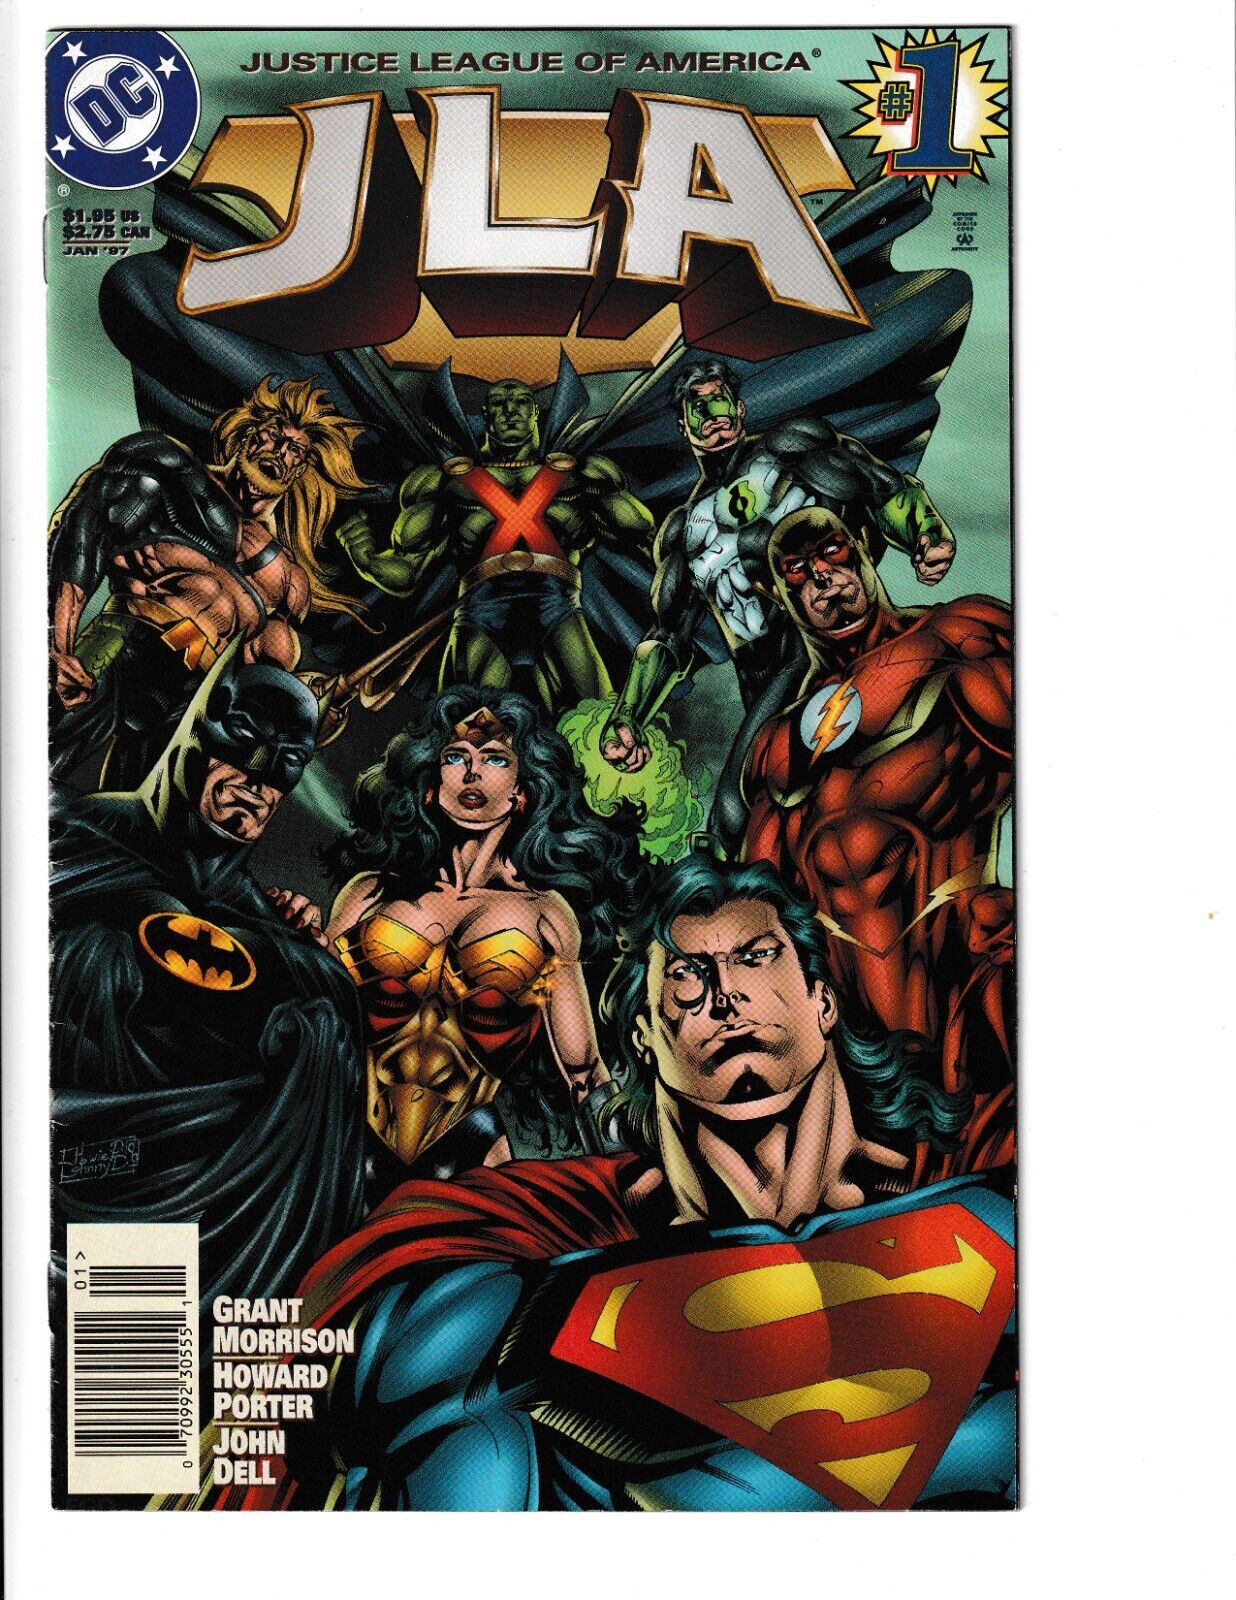 JLA (DC Comics, 1997) 1-125 - Pick Your Book Complete Your Run